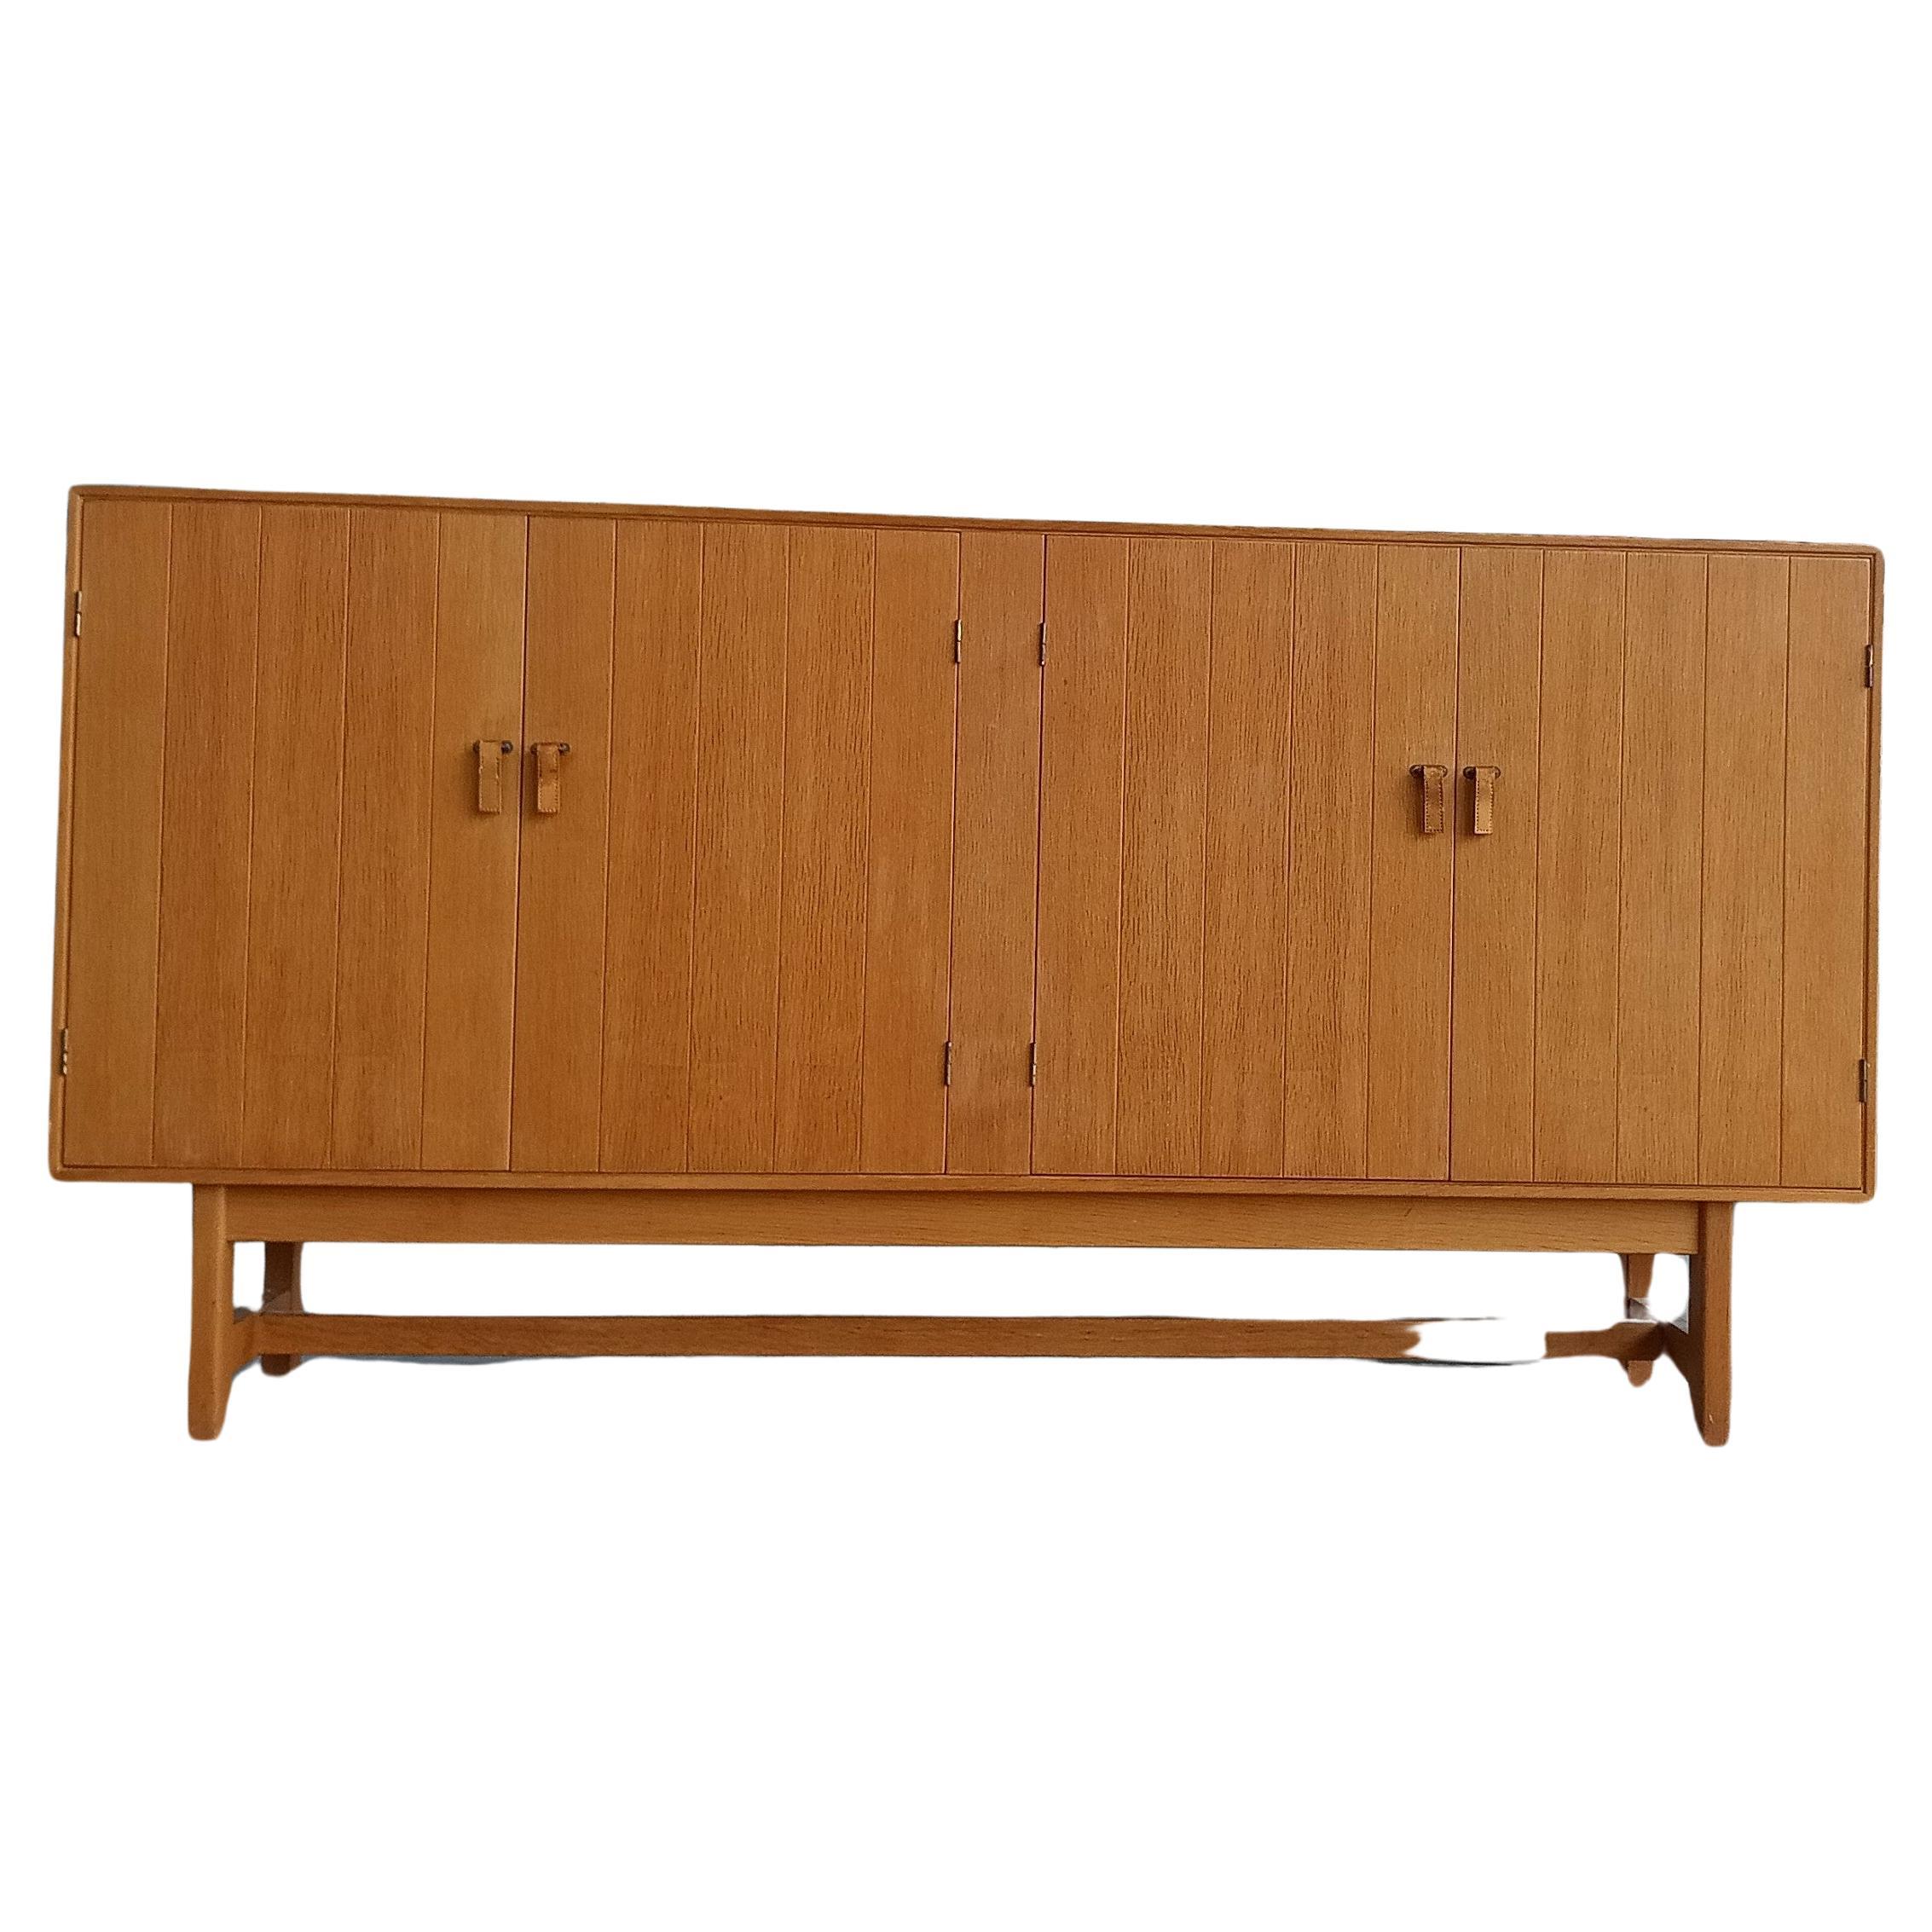 An oak sideboard designed by Kurt Ostervig for KP Mobler, Denmark. 
It has 4 doors with beautiful leather and brass handles.
3 upholstered drawers on the left side.
Besides a slightly visible stain the sideboard is in splendid condition.